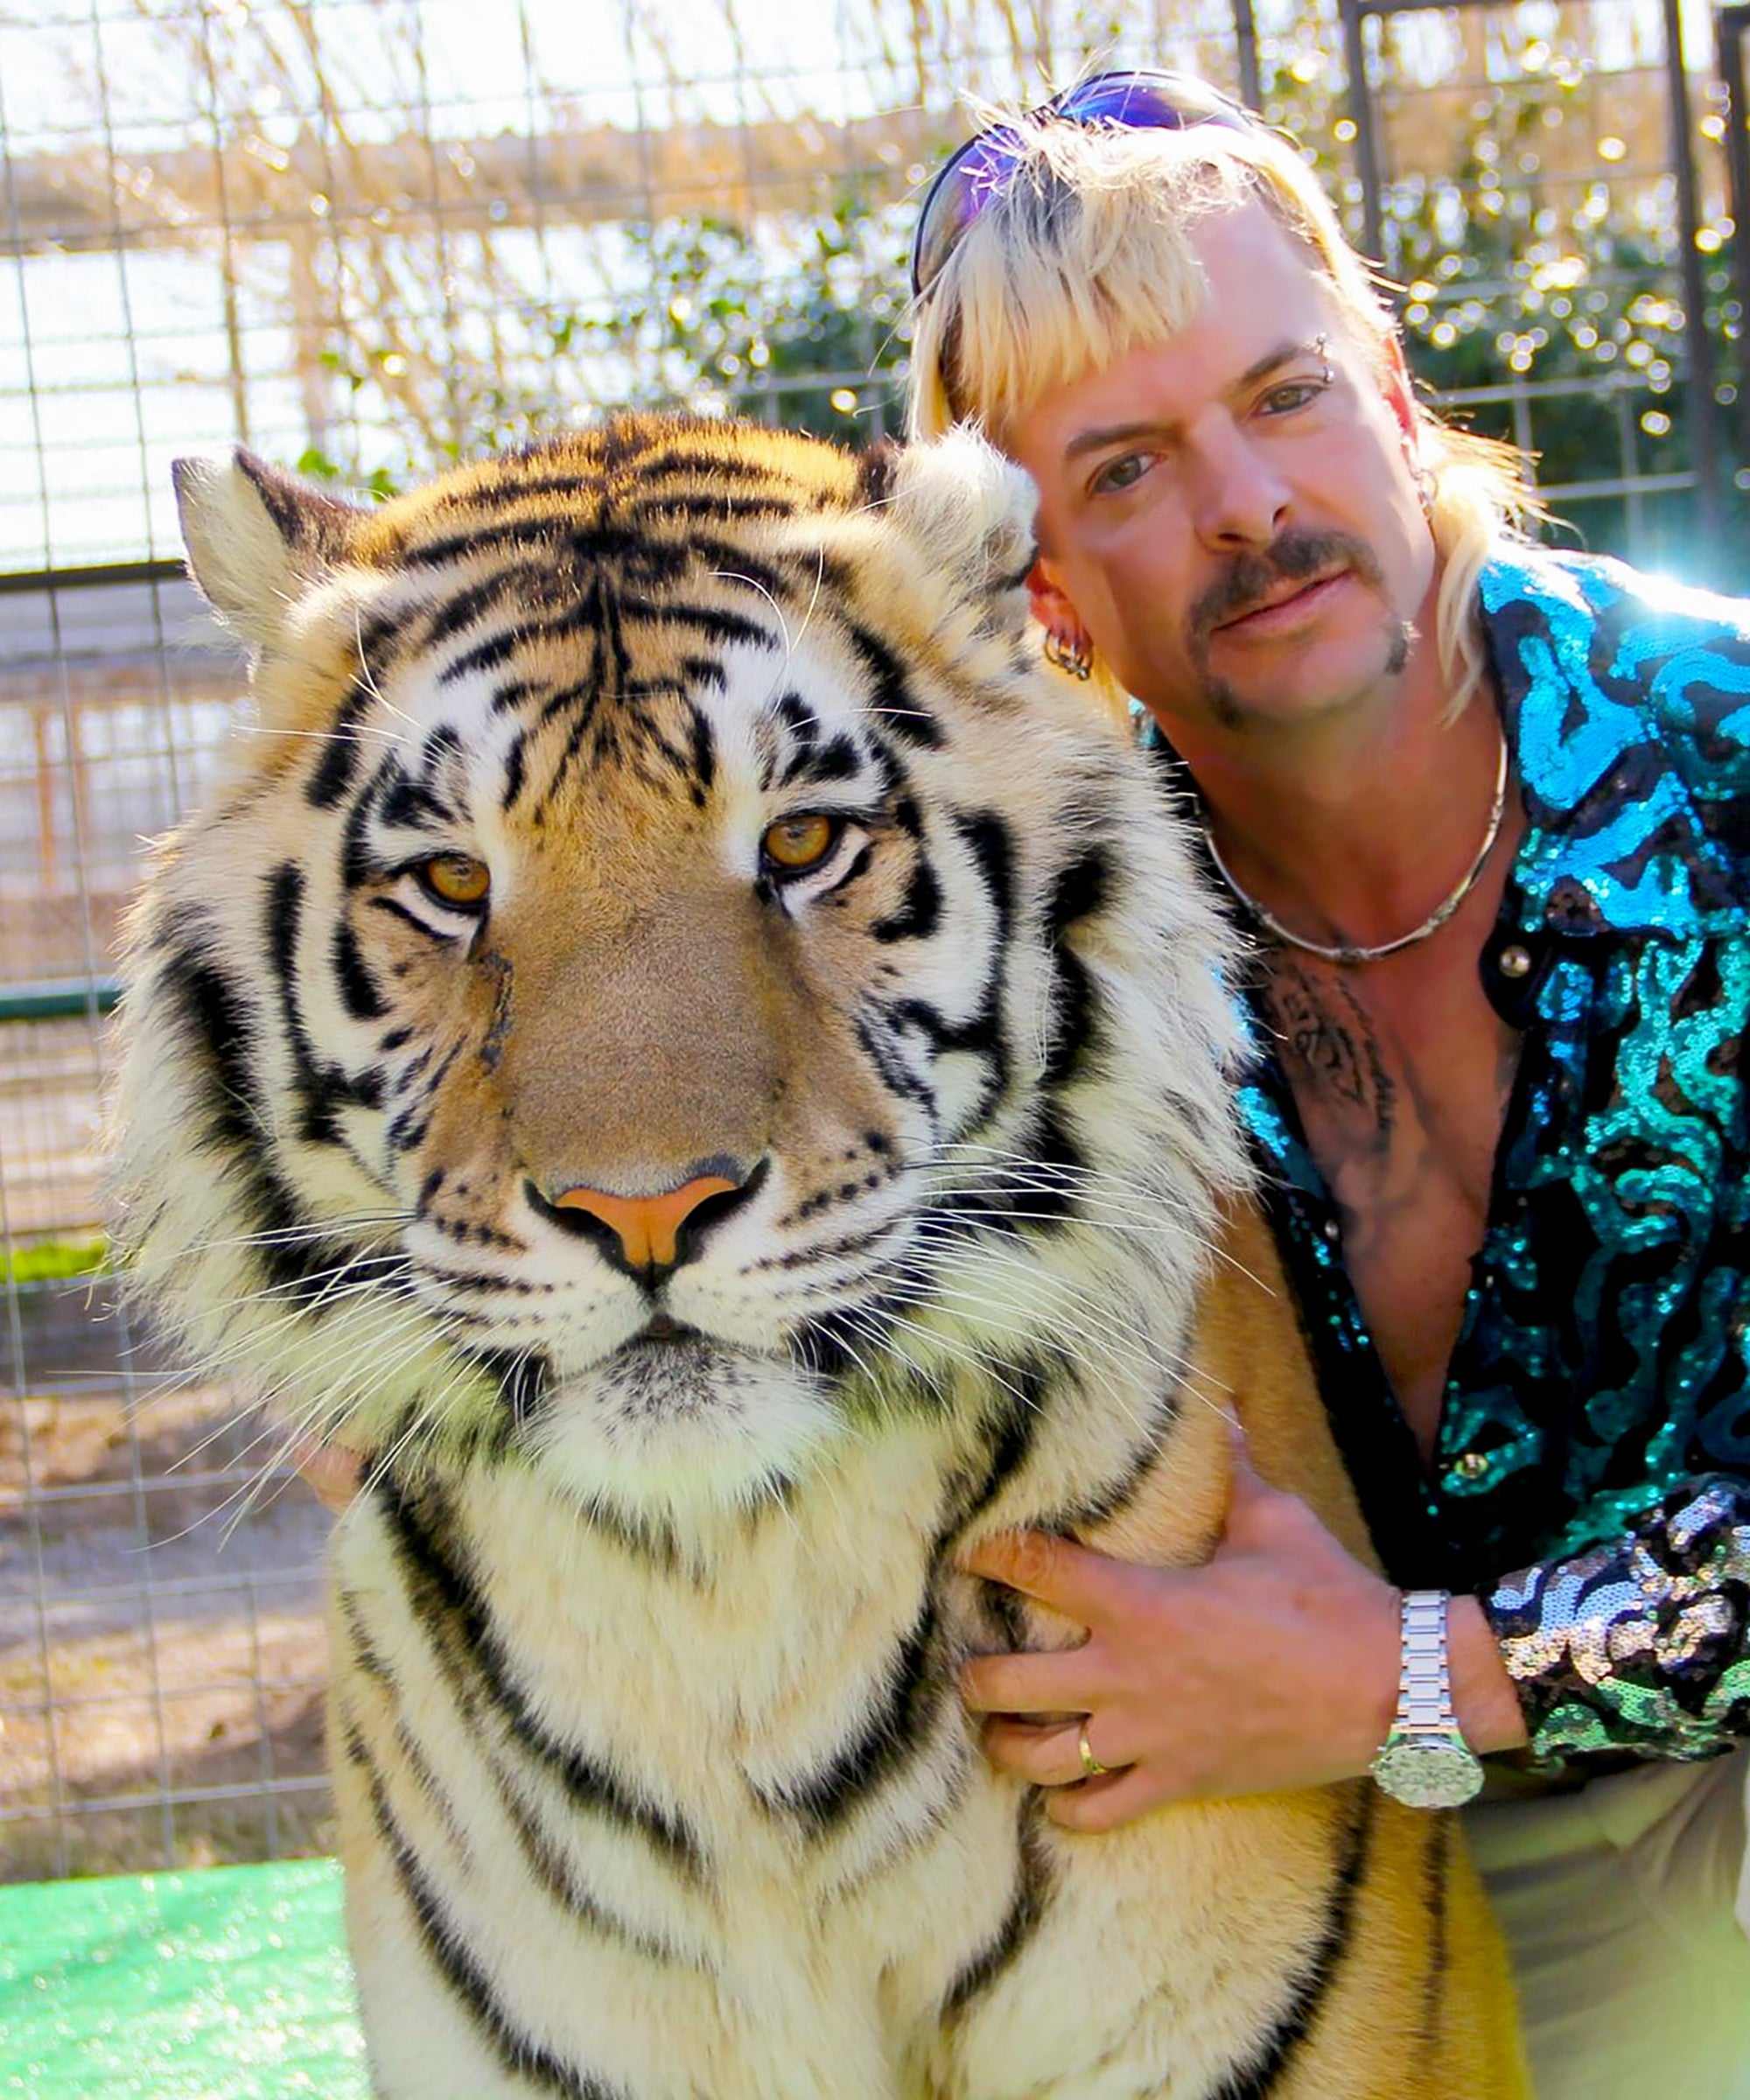 What Happened To Gw Zoo After Joe Exotic Went To Jail